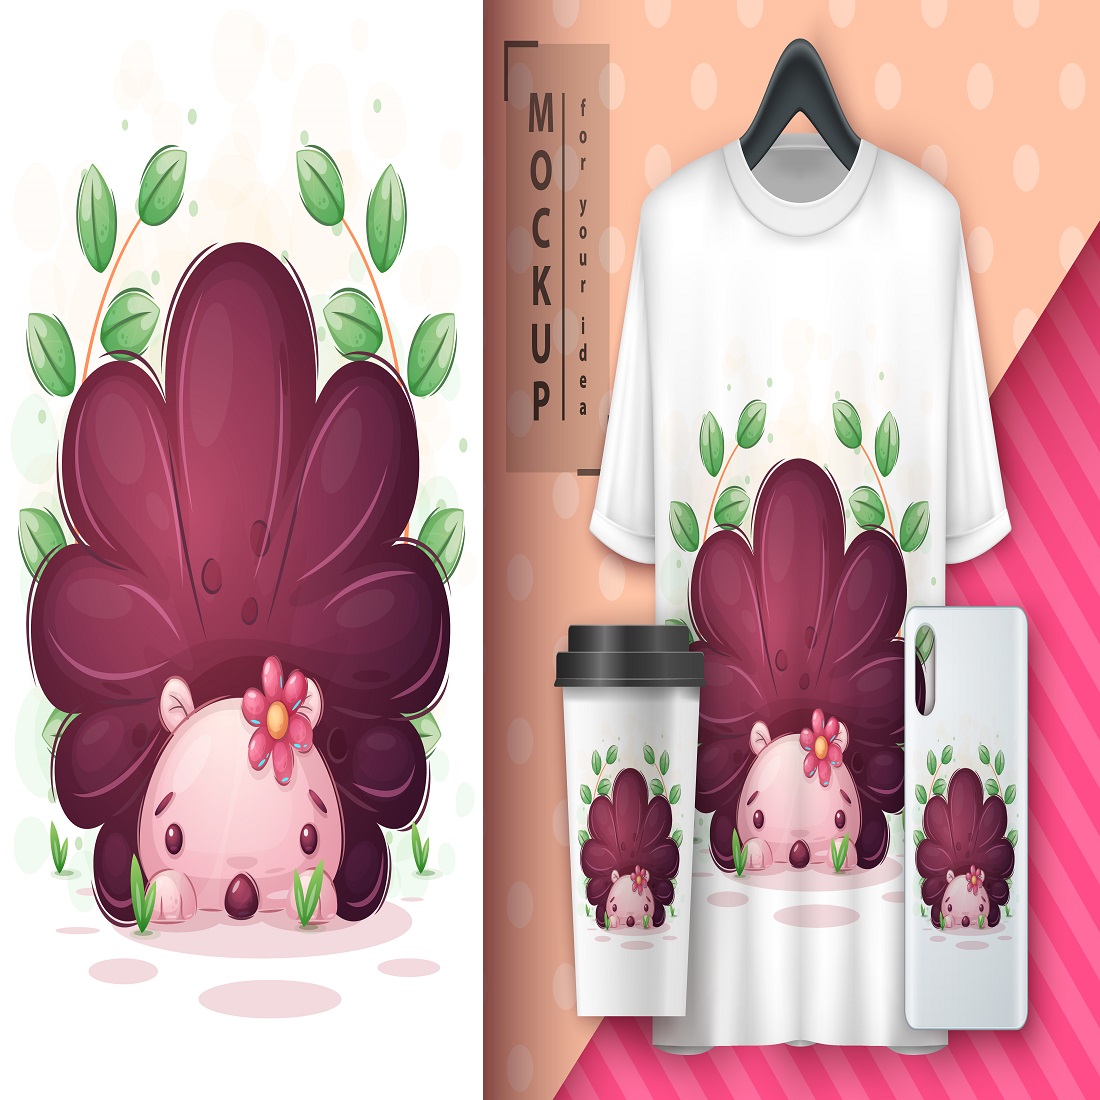 Cute hedgehog with flower poster merchandising preview image.